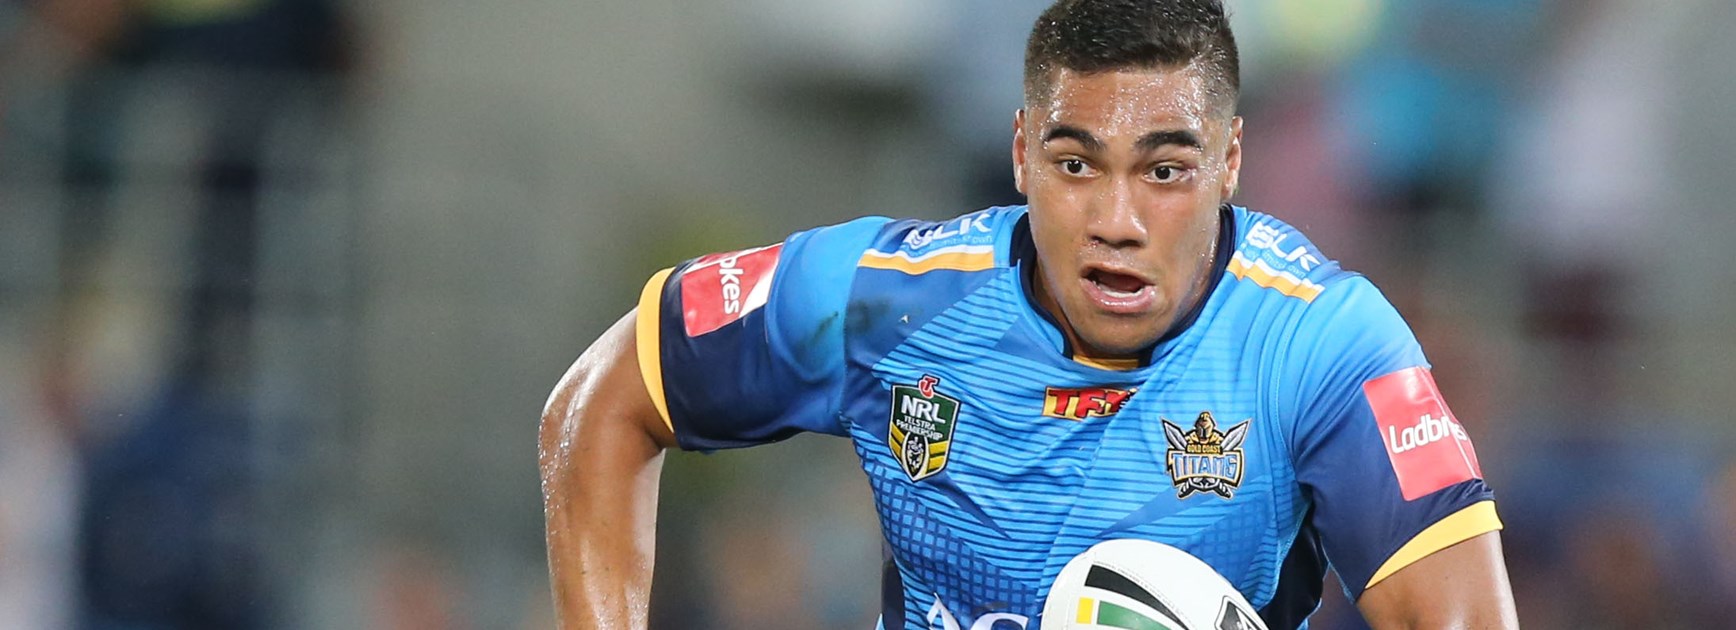 Gold Coast winger John Olive signs for the next two seasons